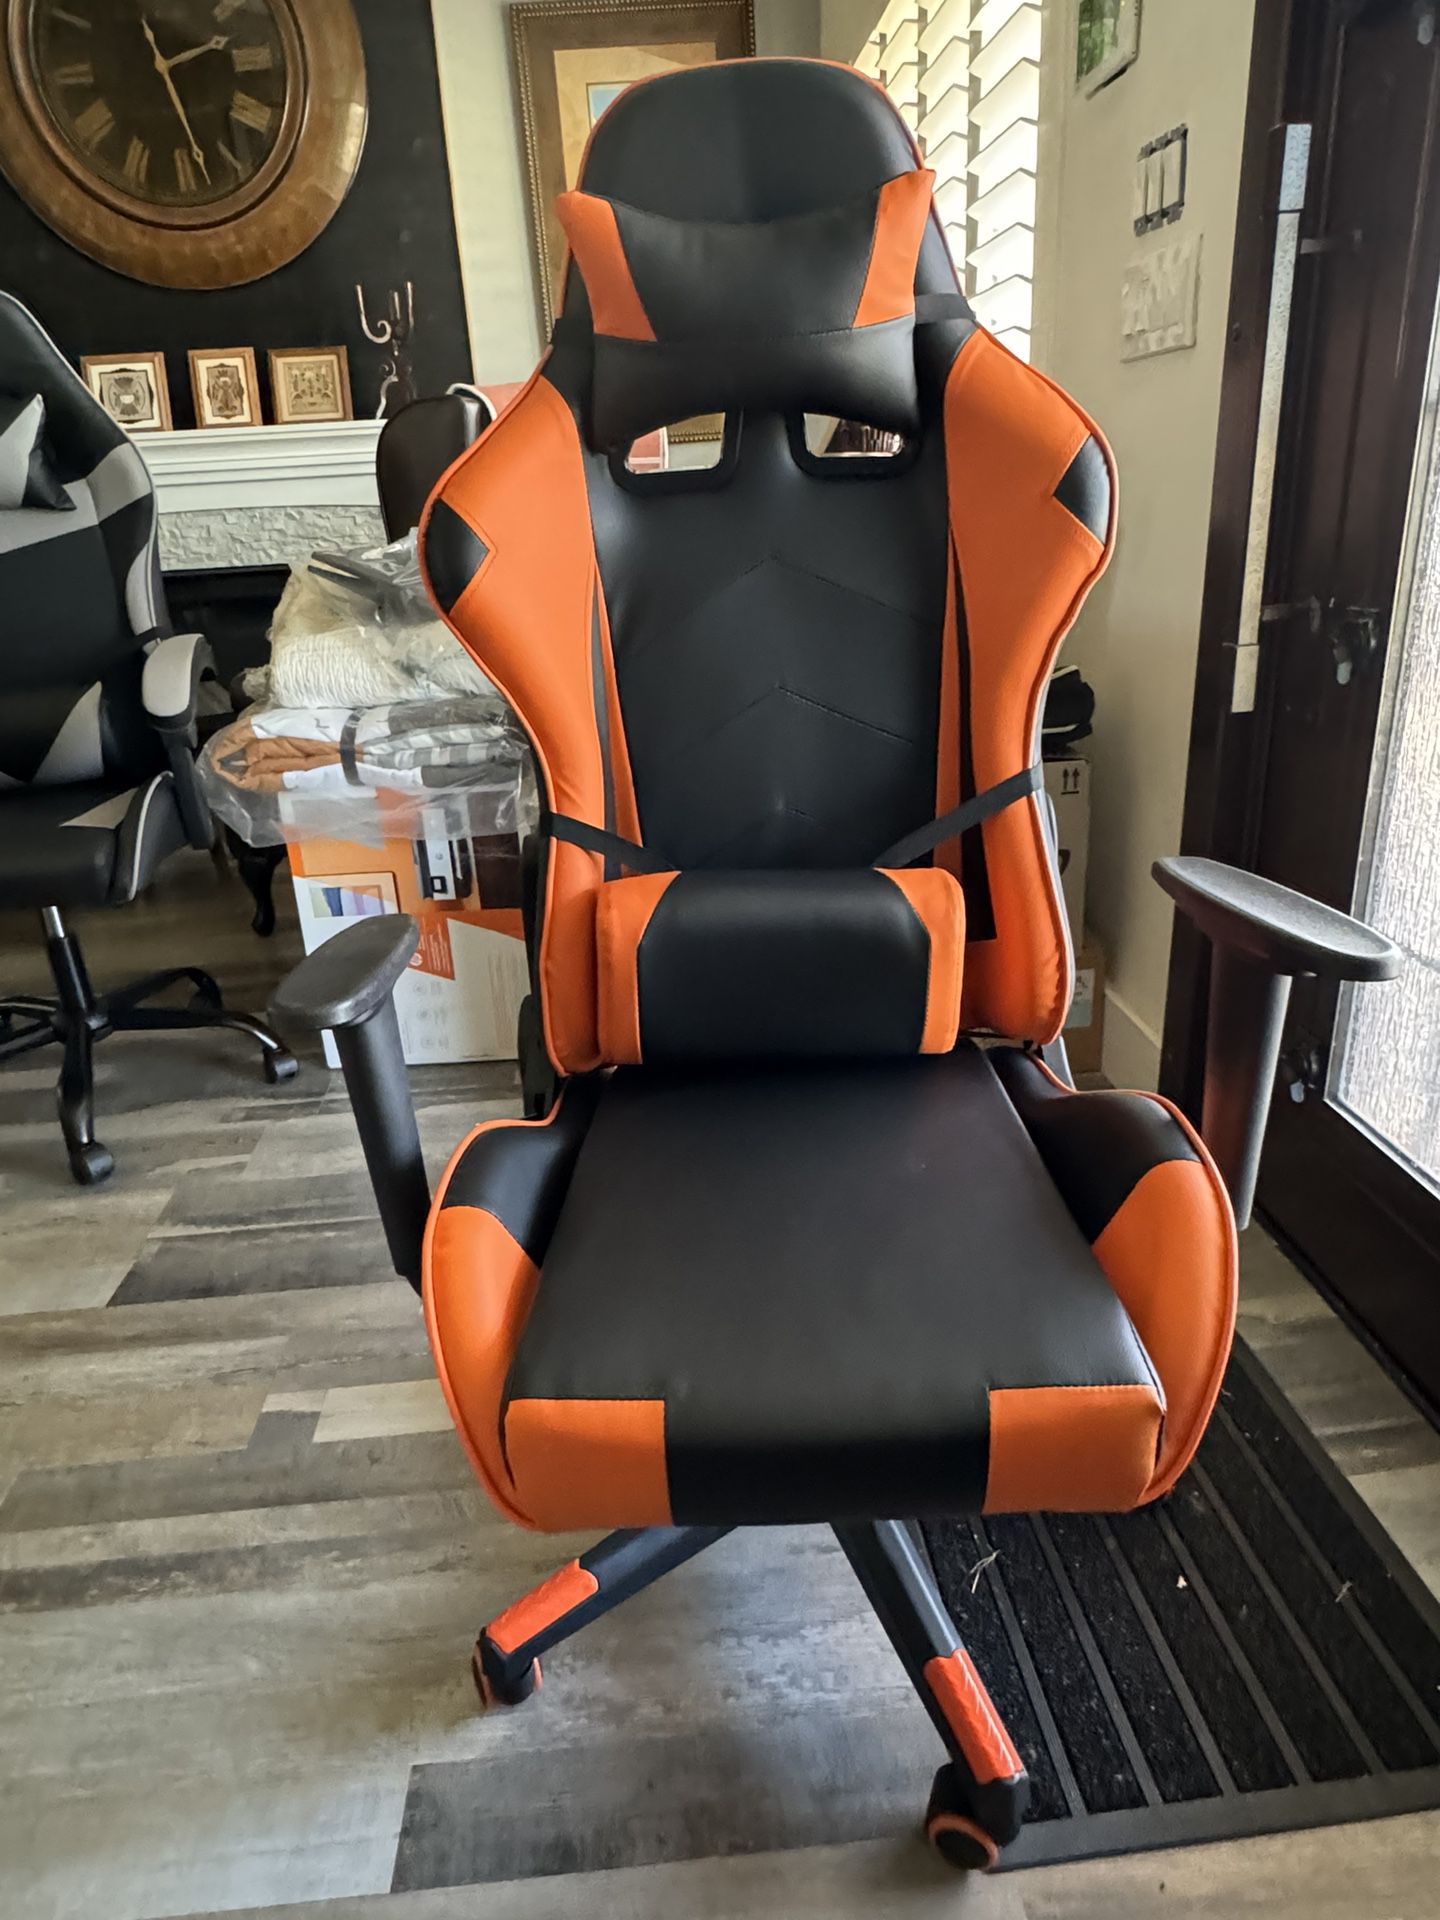 New Gaming Chair For Sale ($50)